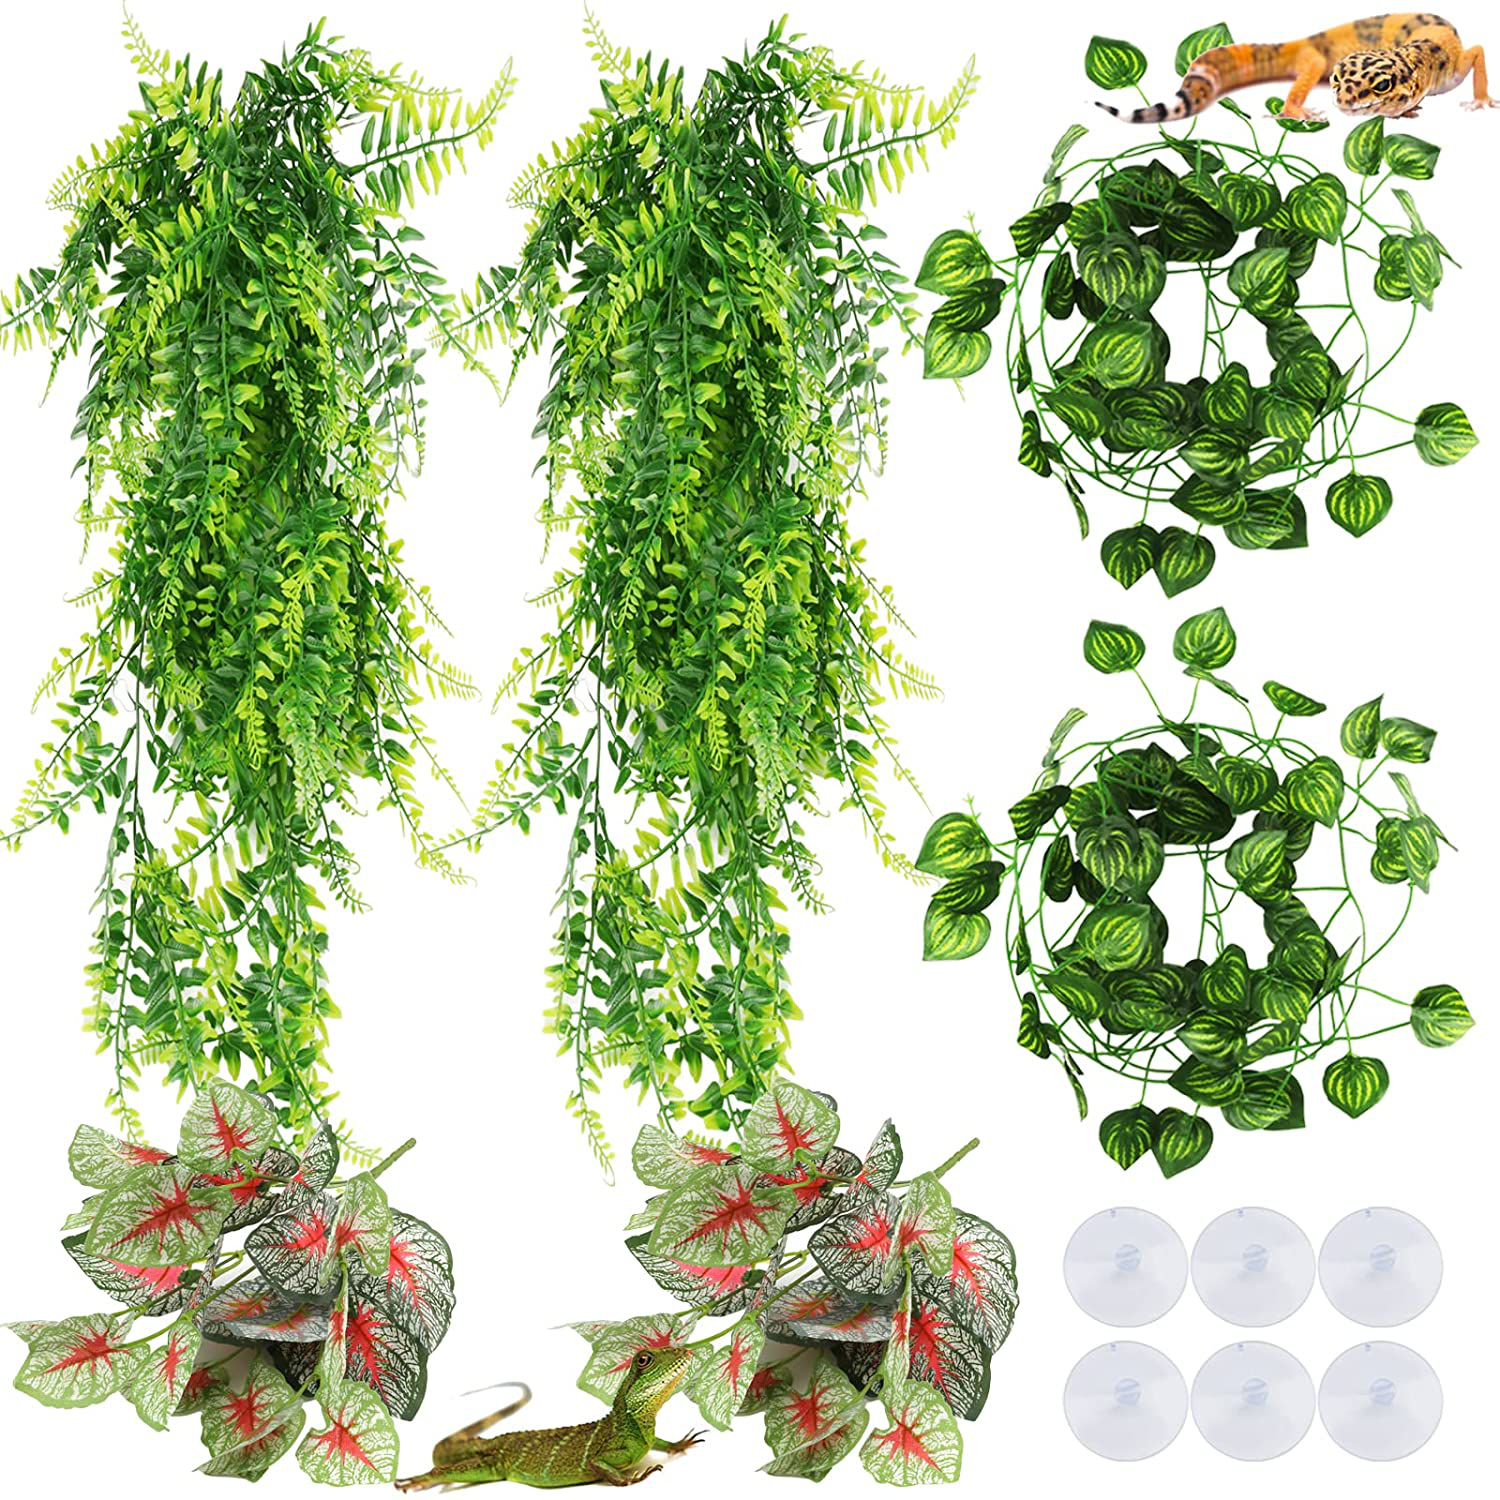 Pietypet Reptile Lizard Habitat Decor Accessories, Bearded Dragon Hammock, Reptile Hammock with Artificial Climbing Vines and Plants for Chameleon, Lizards, Gecko, Snakes, Lguana Animals & Pet Supplies > Pet Supplies > Reptile & Amphibian Supplies > Reptile & Amphibian Habitat Accessories PietyPet 2 large hanging plant with vines  